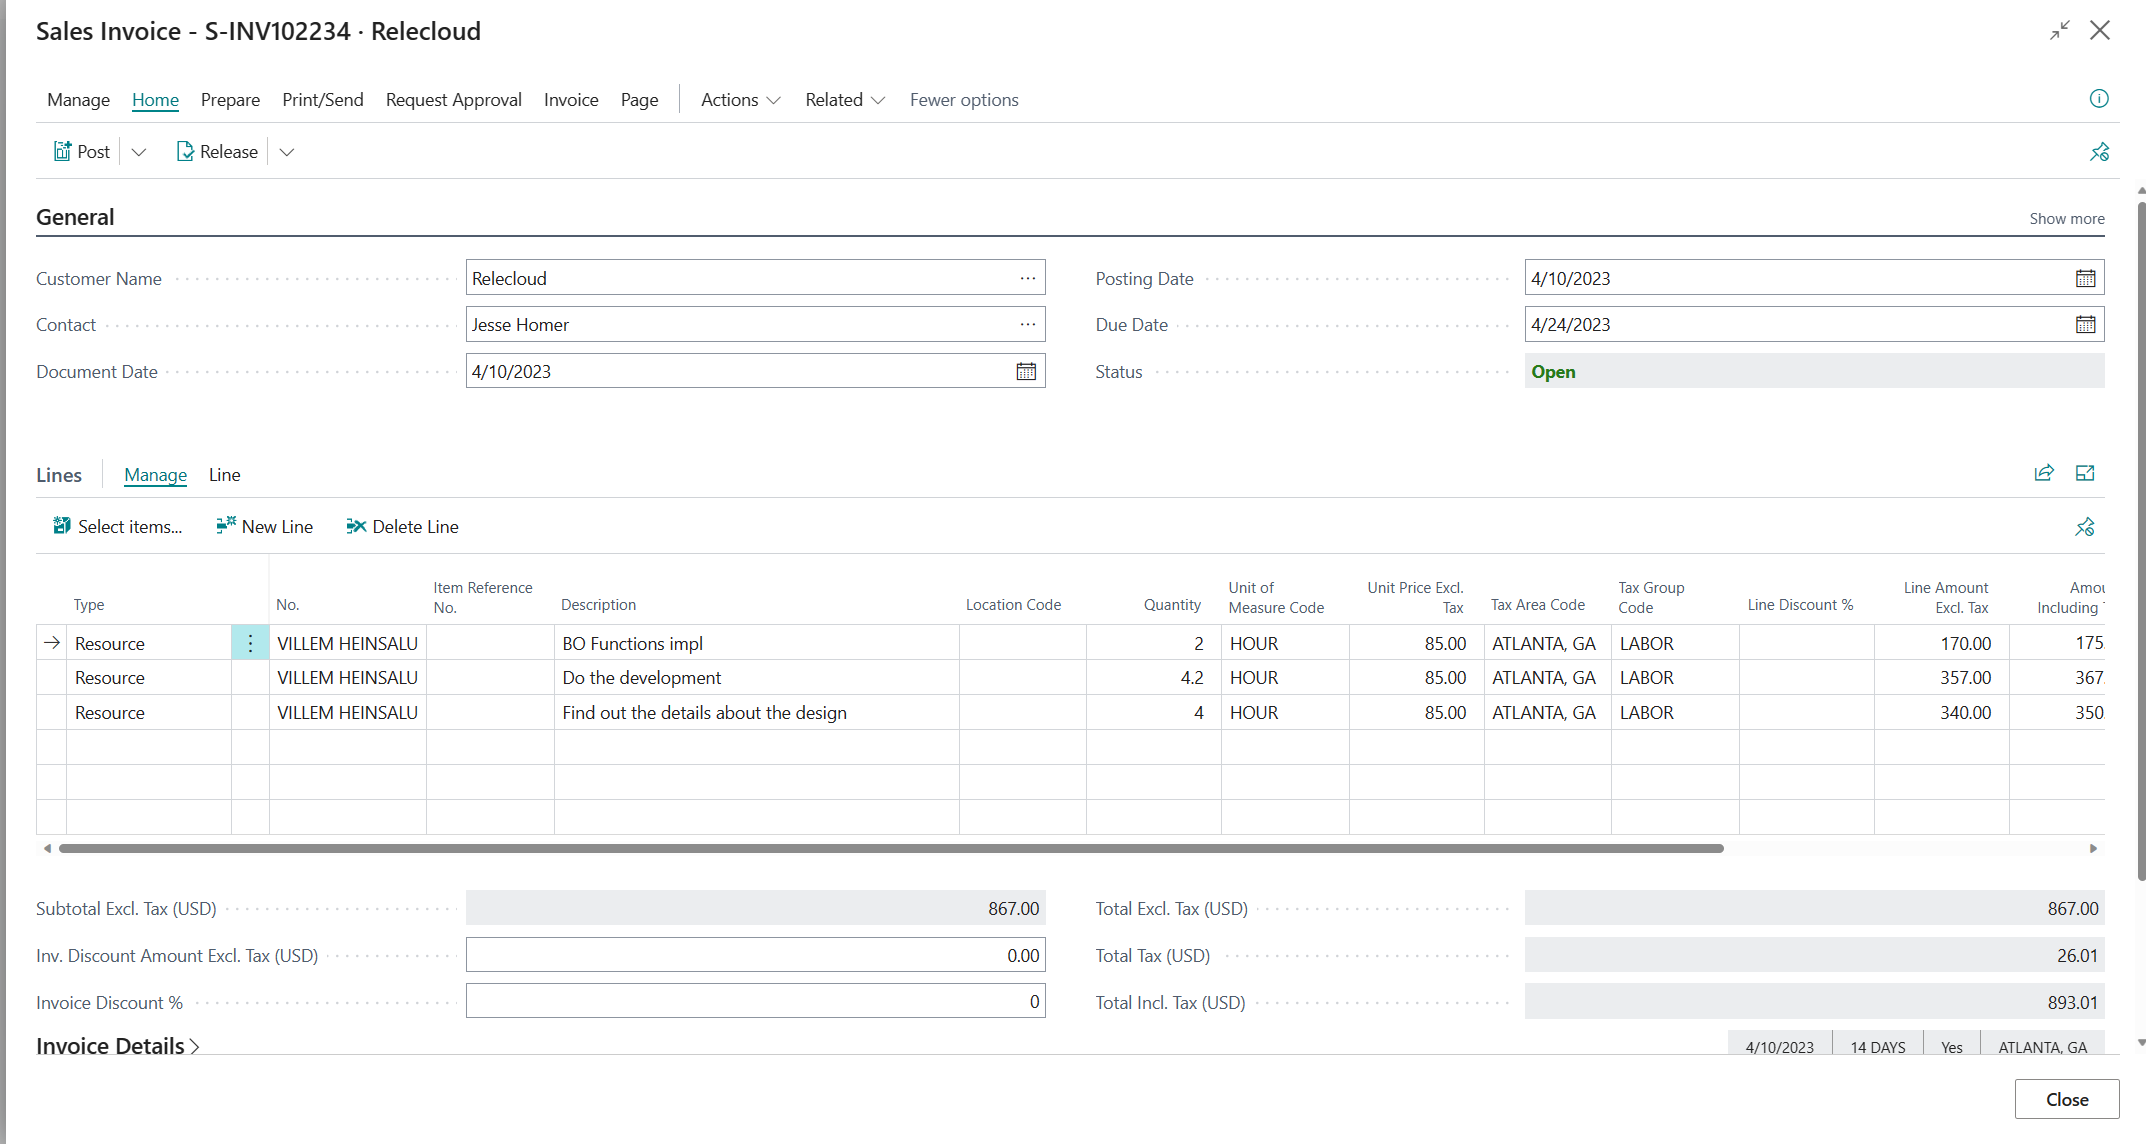 Sales Invoice with Issues From Jira